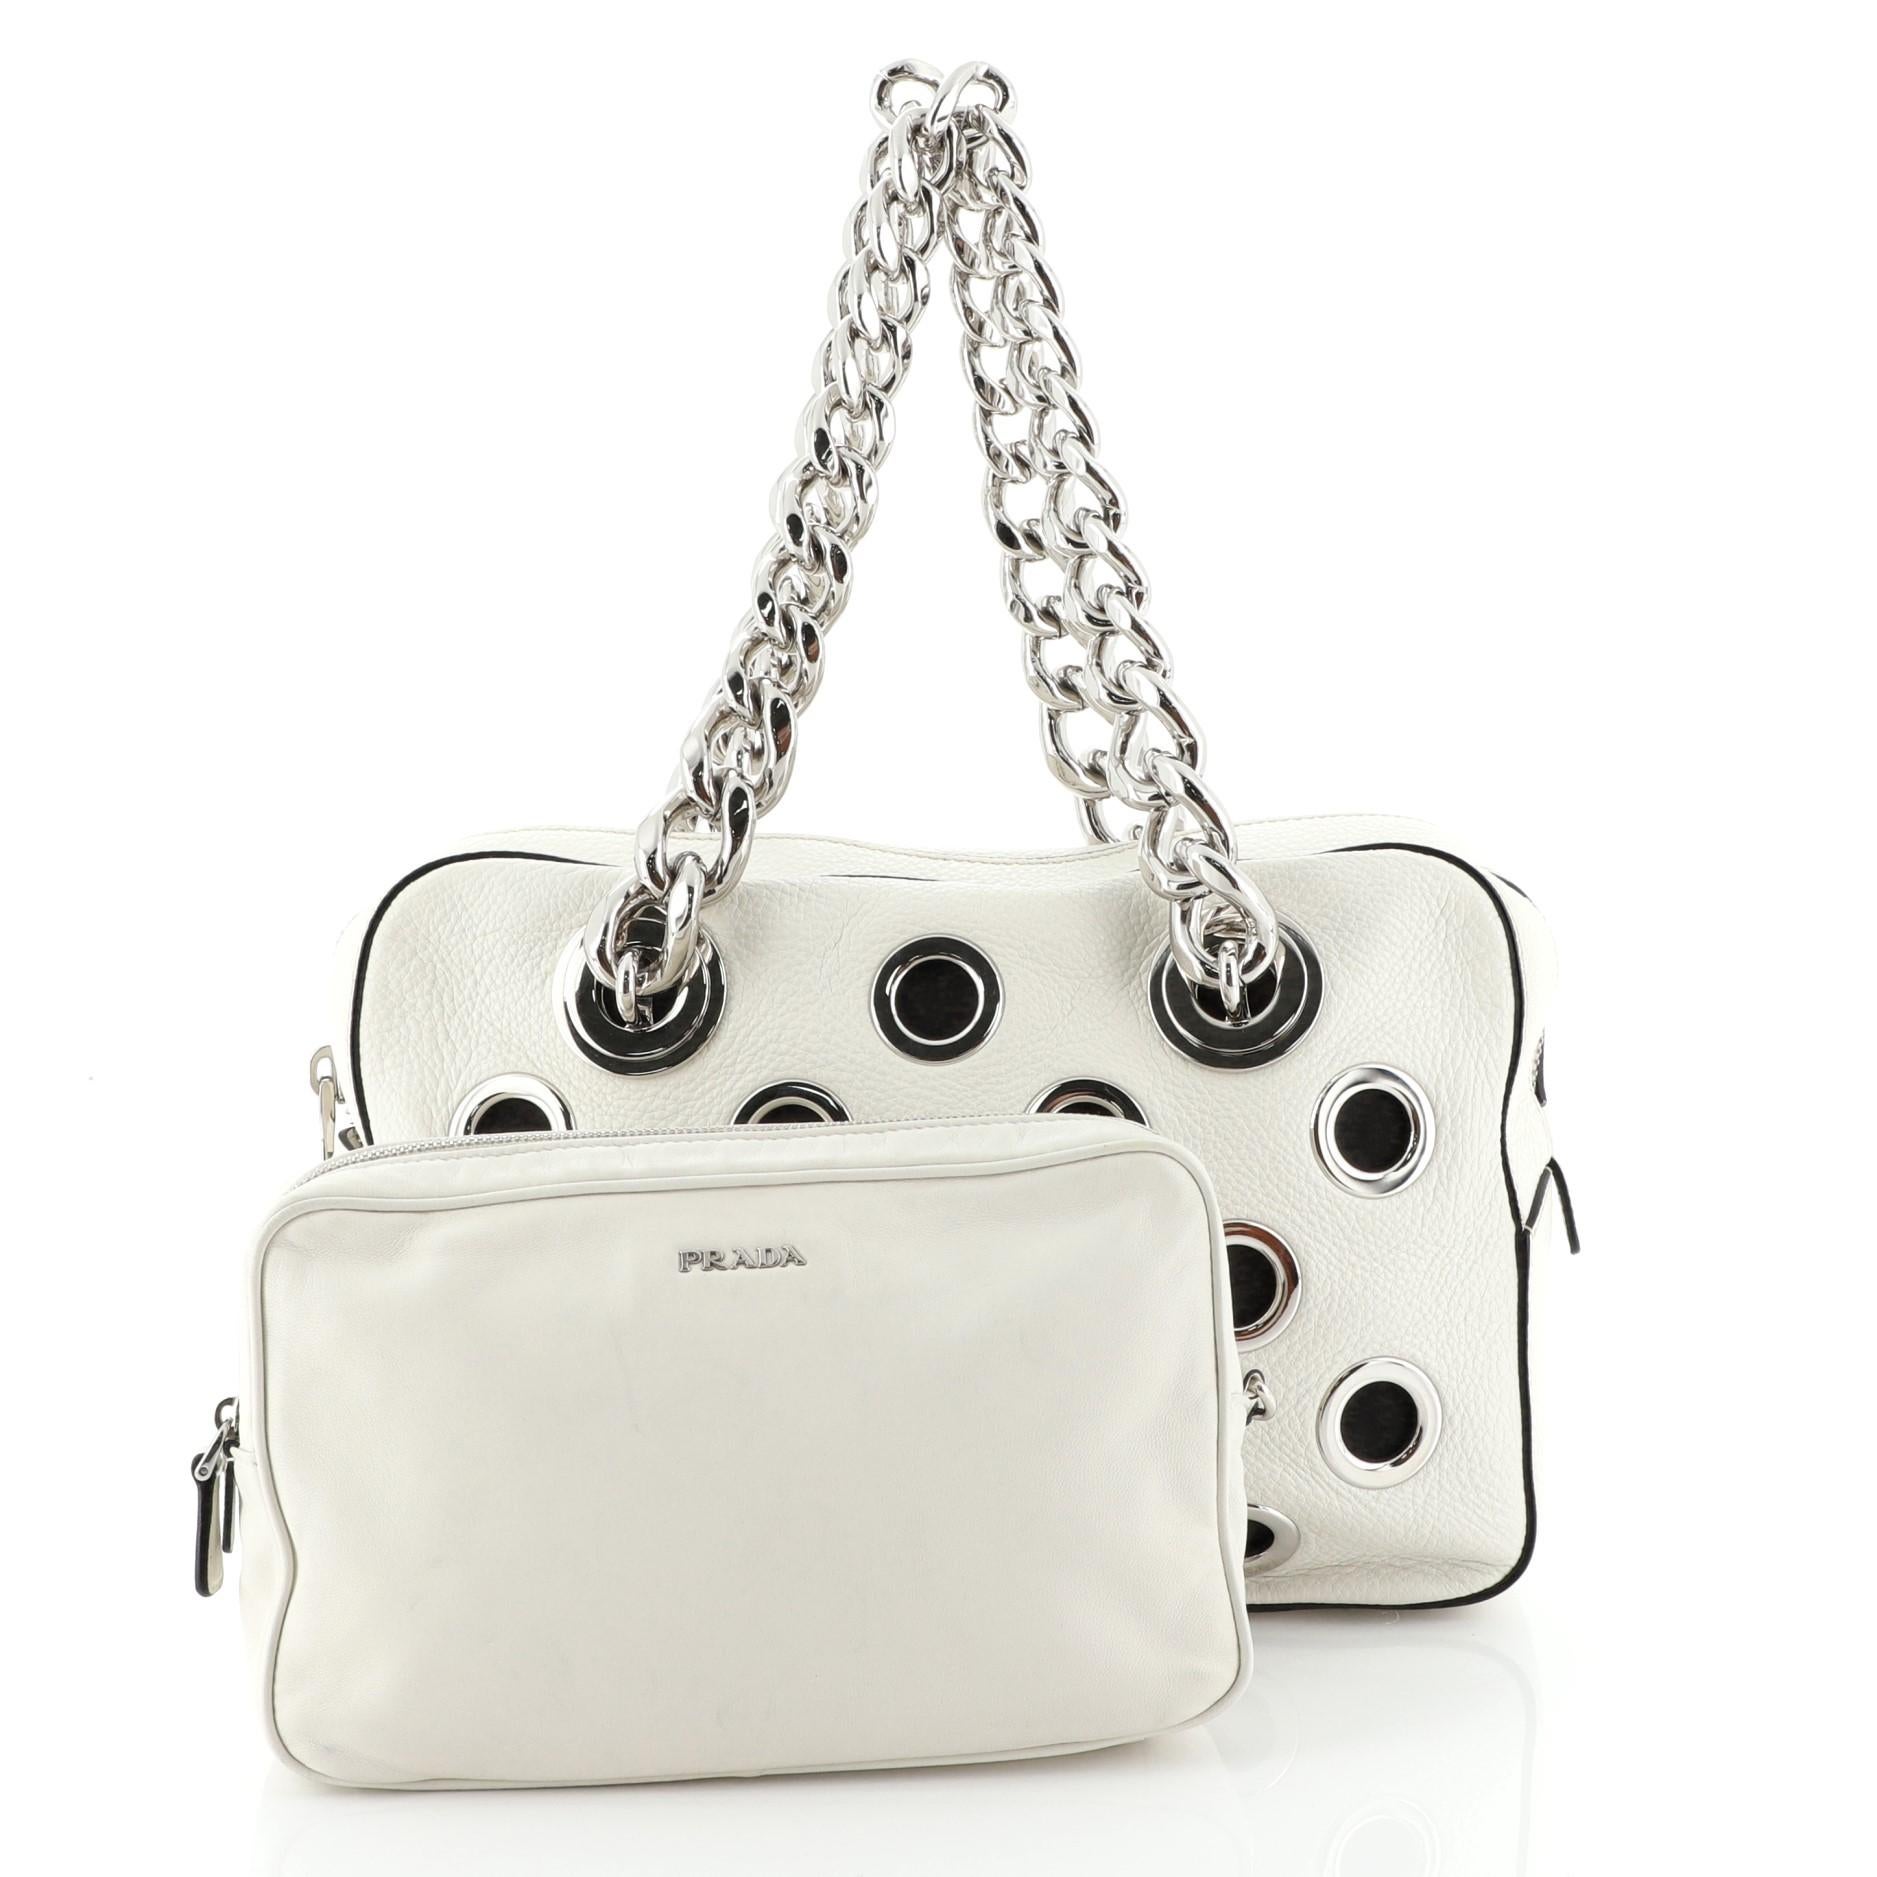 This Prada Grommet Chain Shoulder Bag Vitello Daino Medium, crafted from white vitello daino leather, features dual chain straps, large grommets detailing all throughout, protective base studs and silver-tone hardware. Its zip closure opens to a